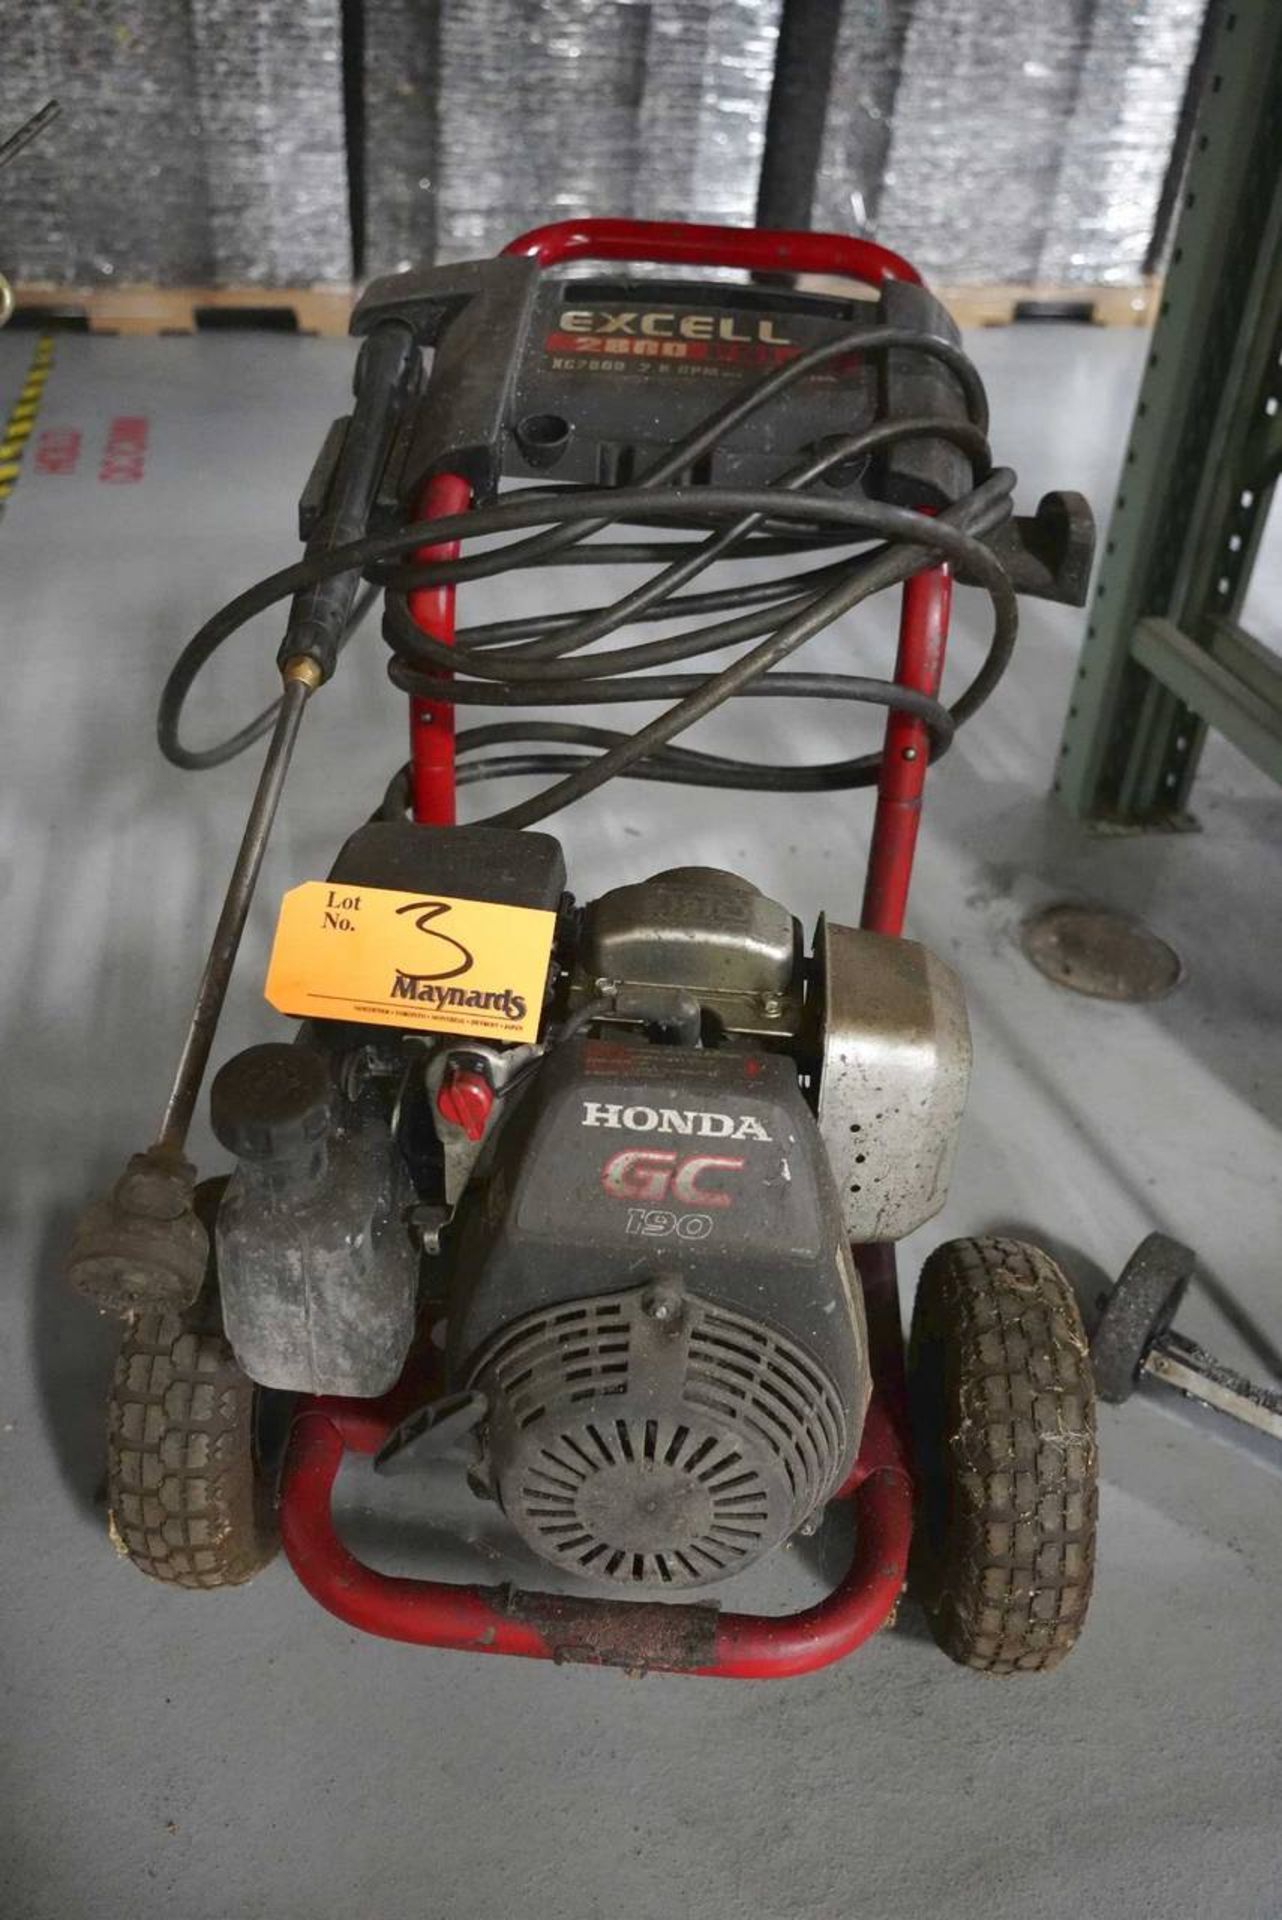 Honda Excell XC2800 Power Washer